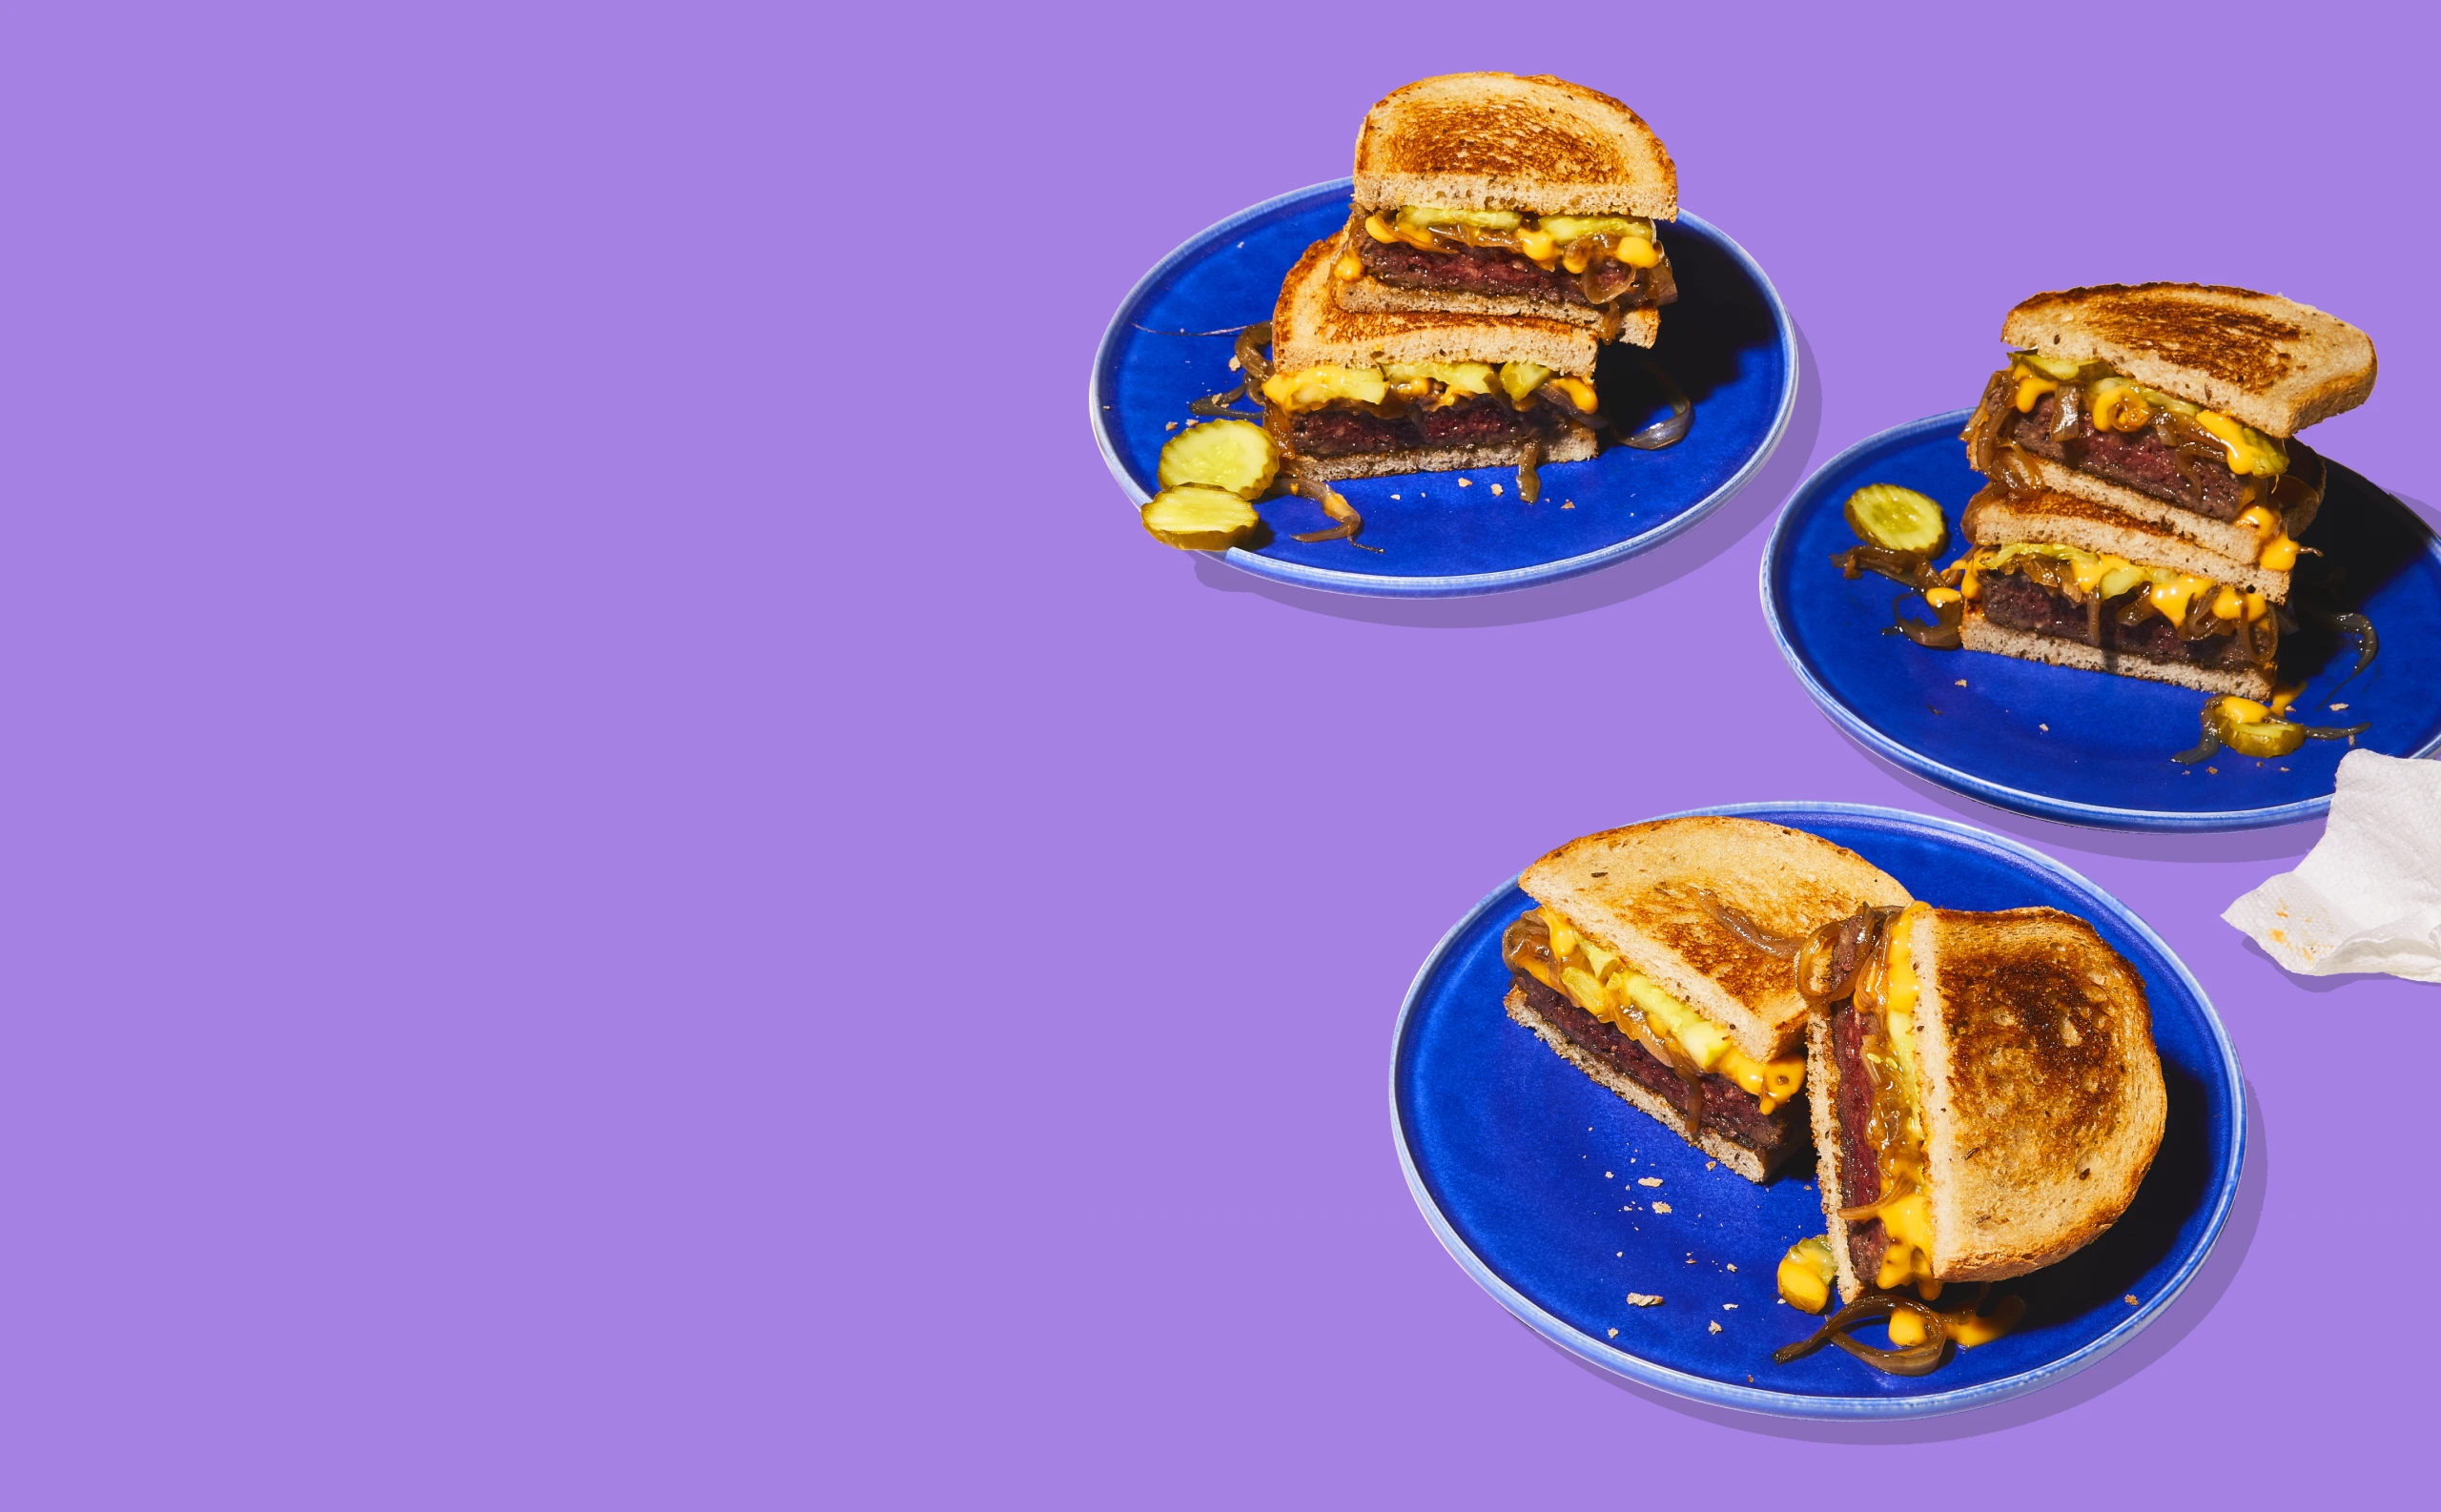 Impossible Burger Patty Melts on plates on purple background